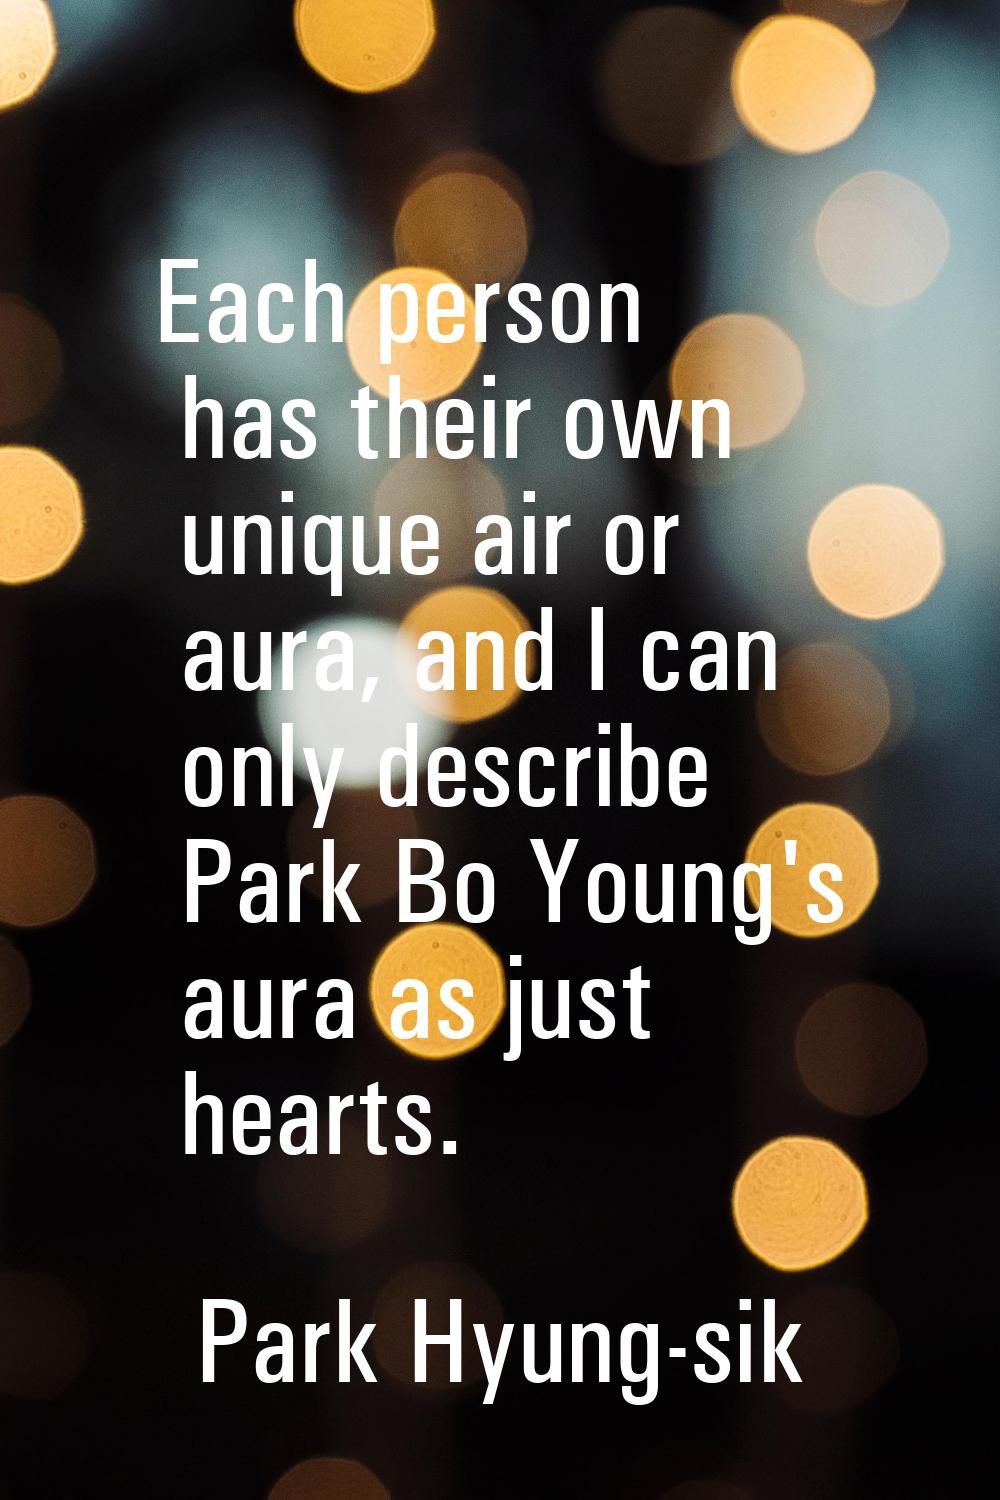 Each person has their own unique air or aura, and I can only describe Park Bo Young's aura as just 